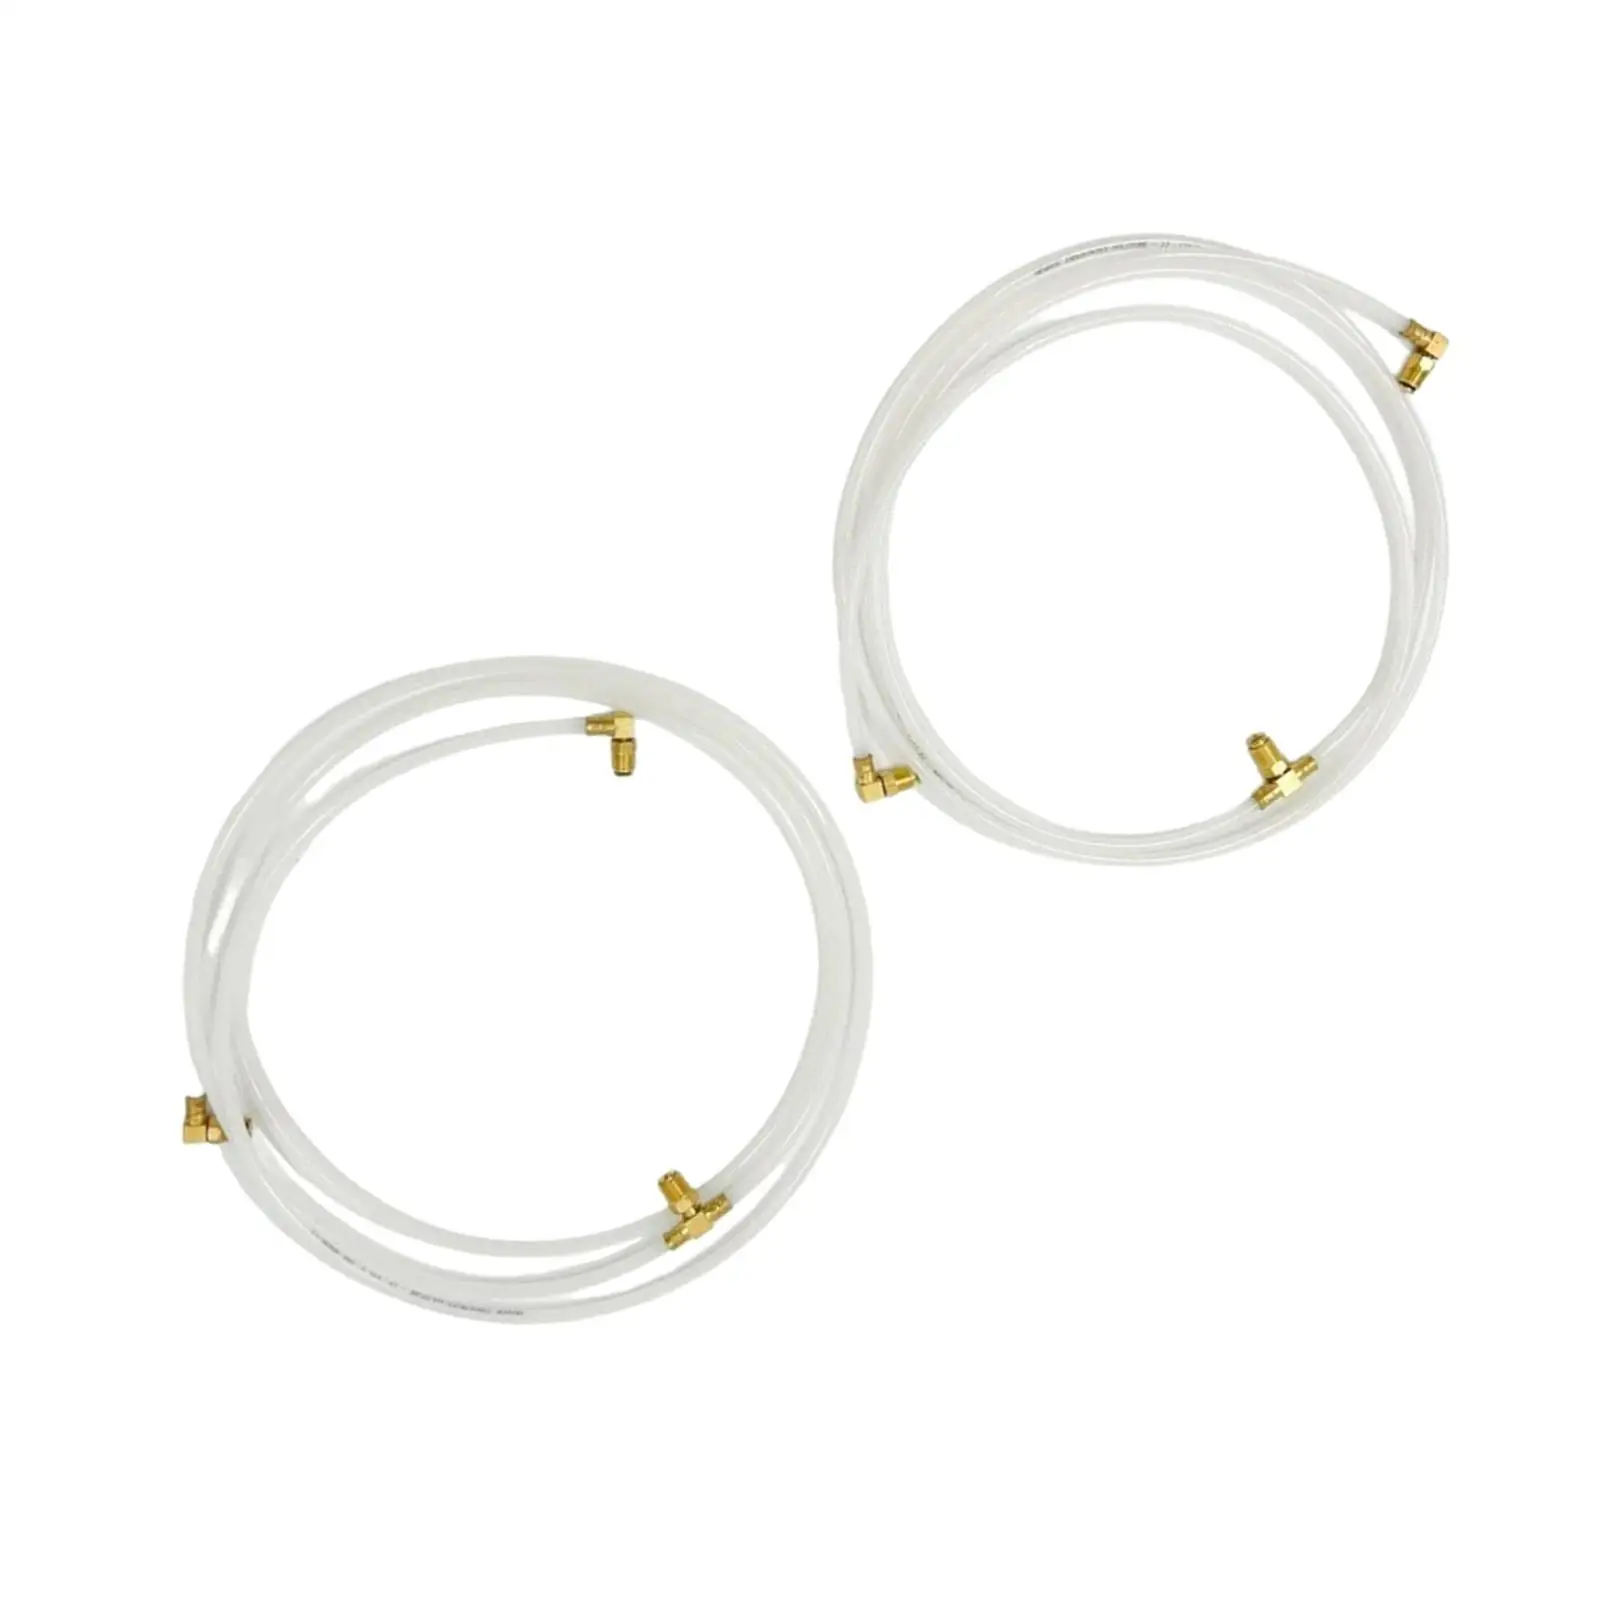 Pair Convertible Top Hydraulic Fluid Hose Lines Pair Hoses for Chevrolet Chevy II Impala Corvair Easy Installation